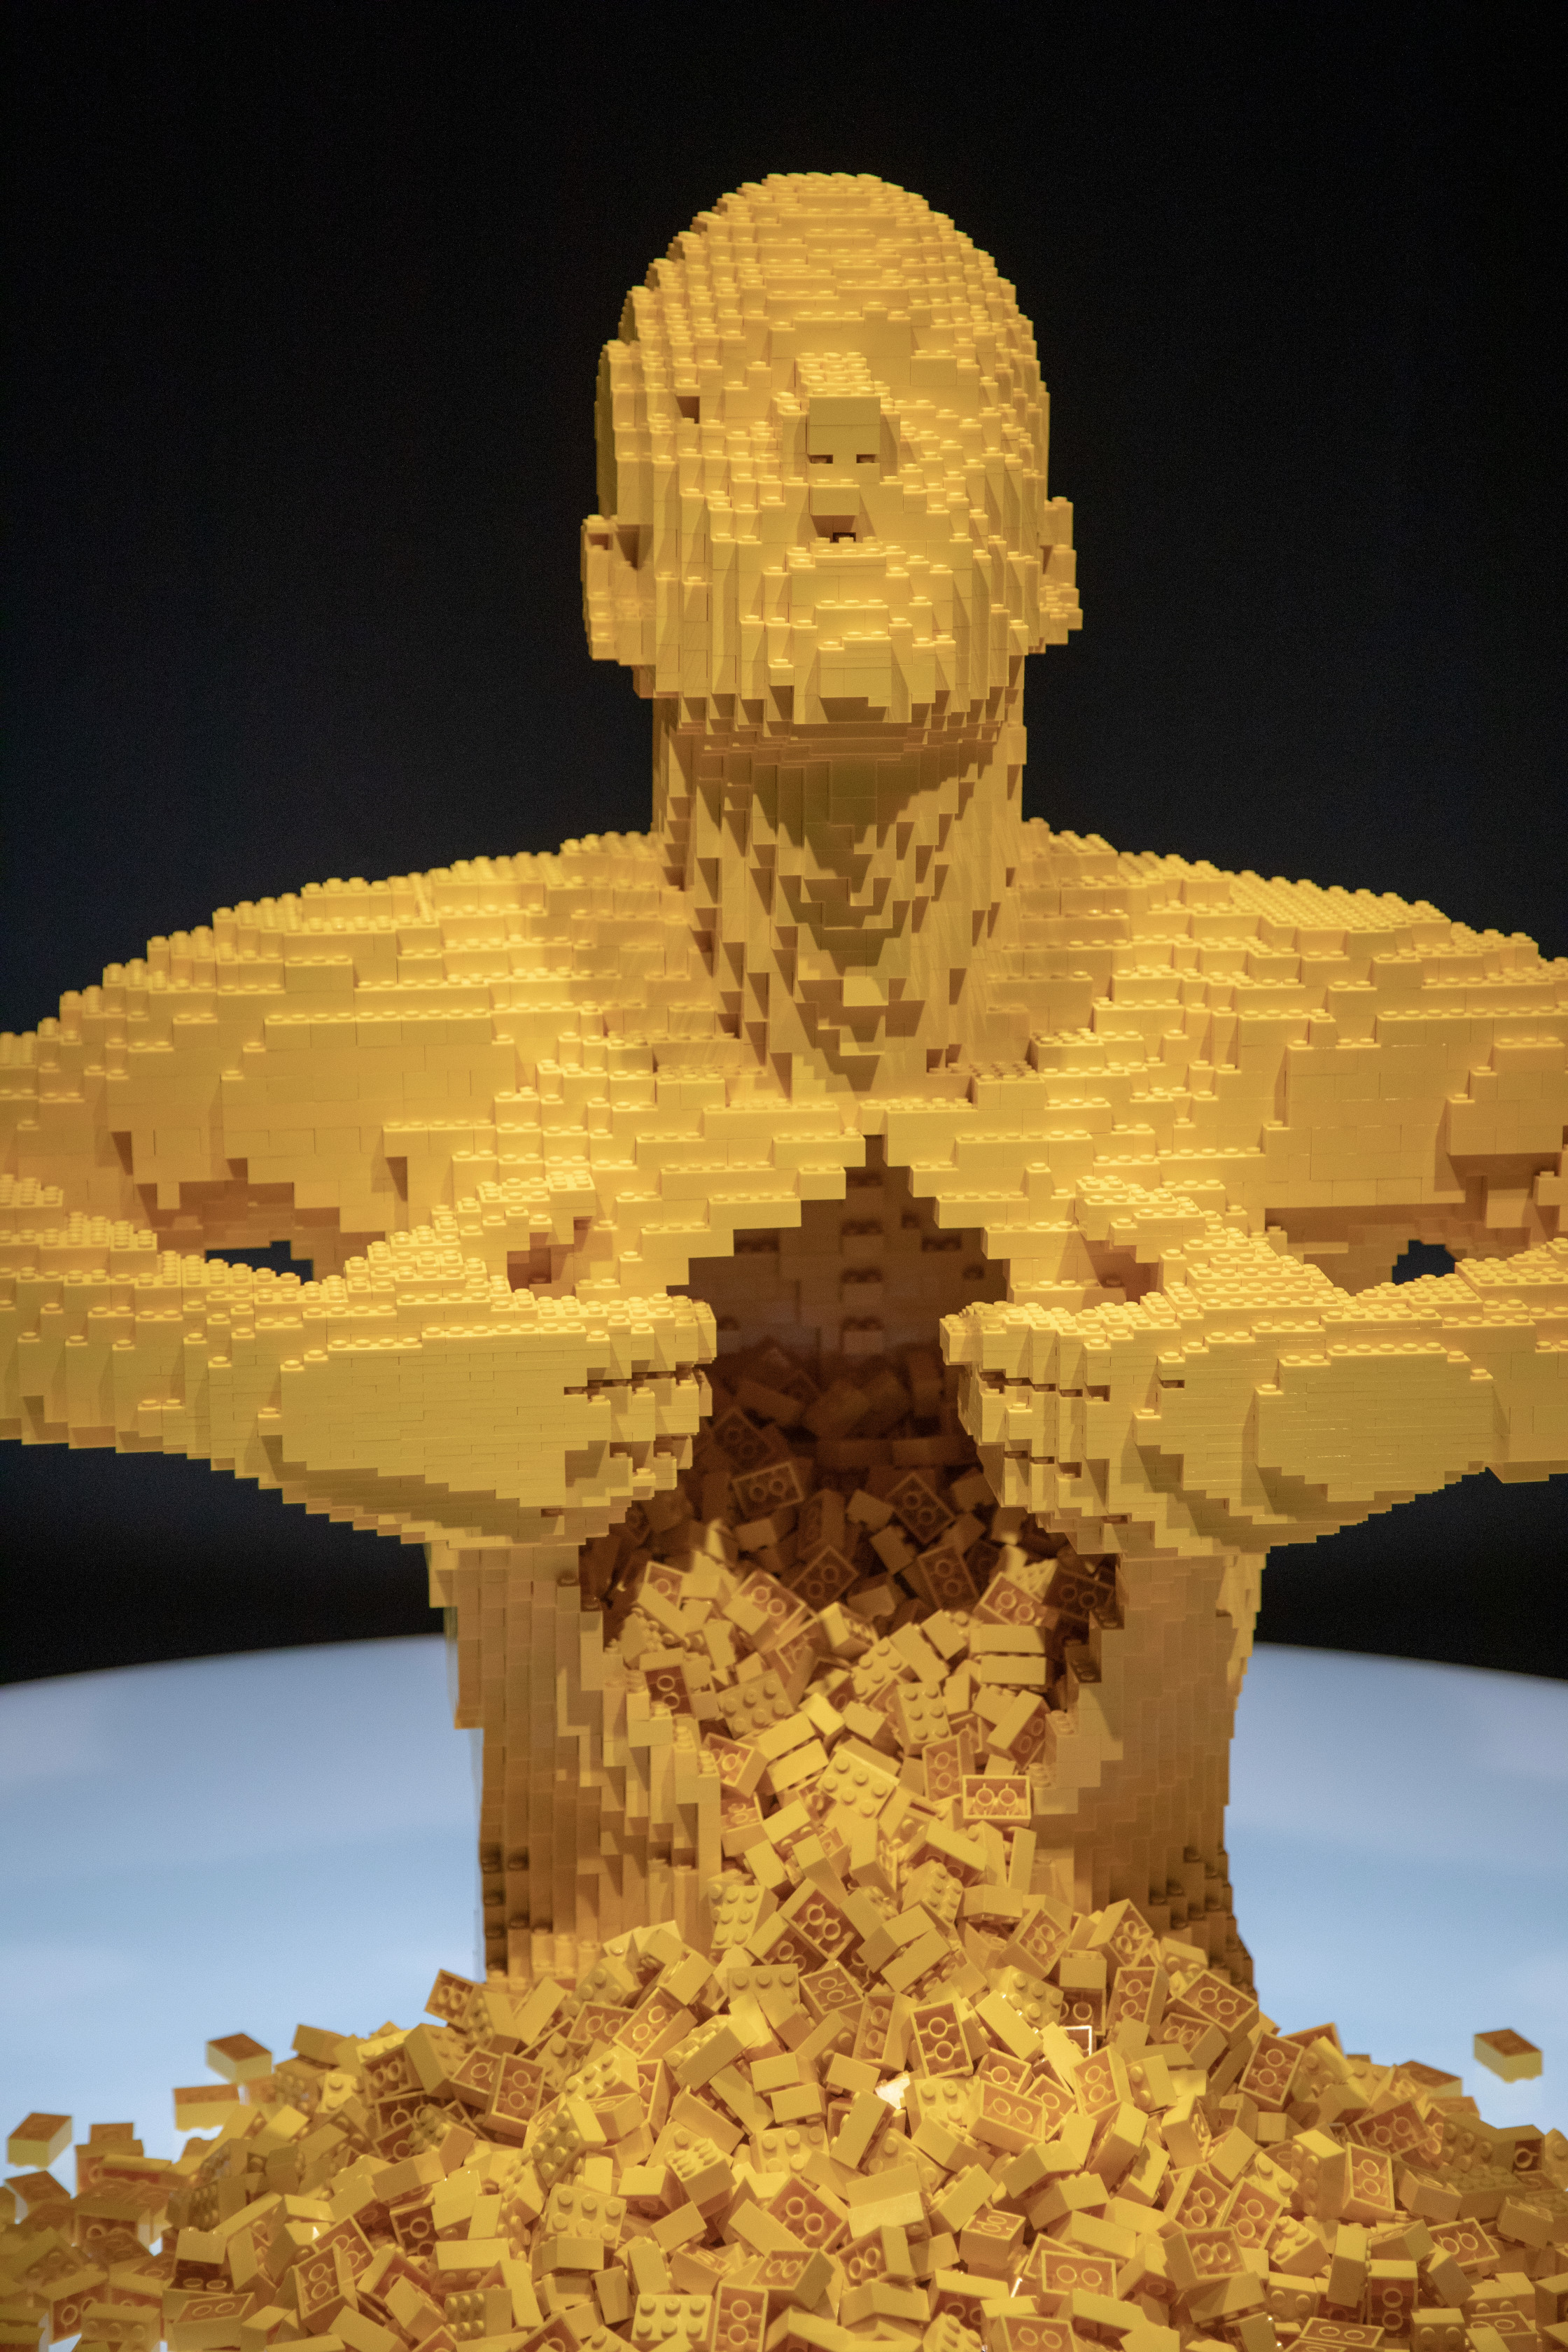 The fan favorite Yellow is a life-size sculpture of a man ripping his chest open with thousands of yellow LEGO bricks cascading from the cavity. (Yellow has gained pop-culture fame appearing on fashion labels, album covers and even in Lady Gaga’s music video “G.U.Y.”) (PHOTO CREDIT: JerSean Golatt/Perot Museum of Nature and Science)